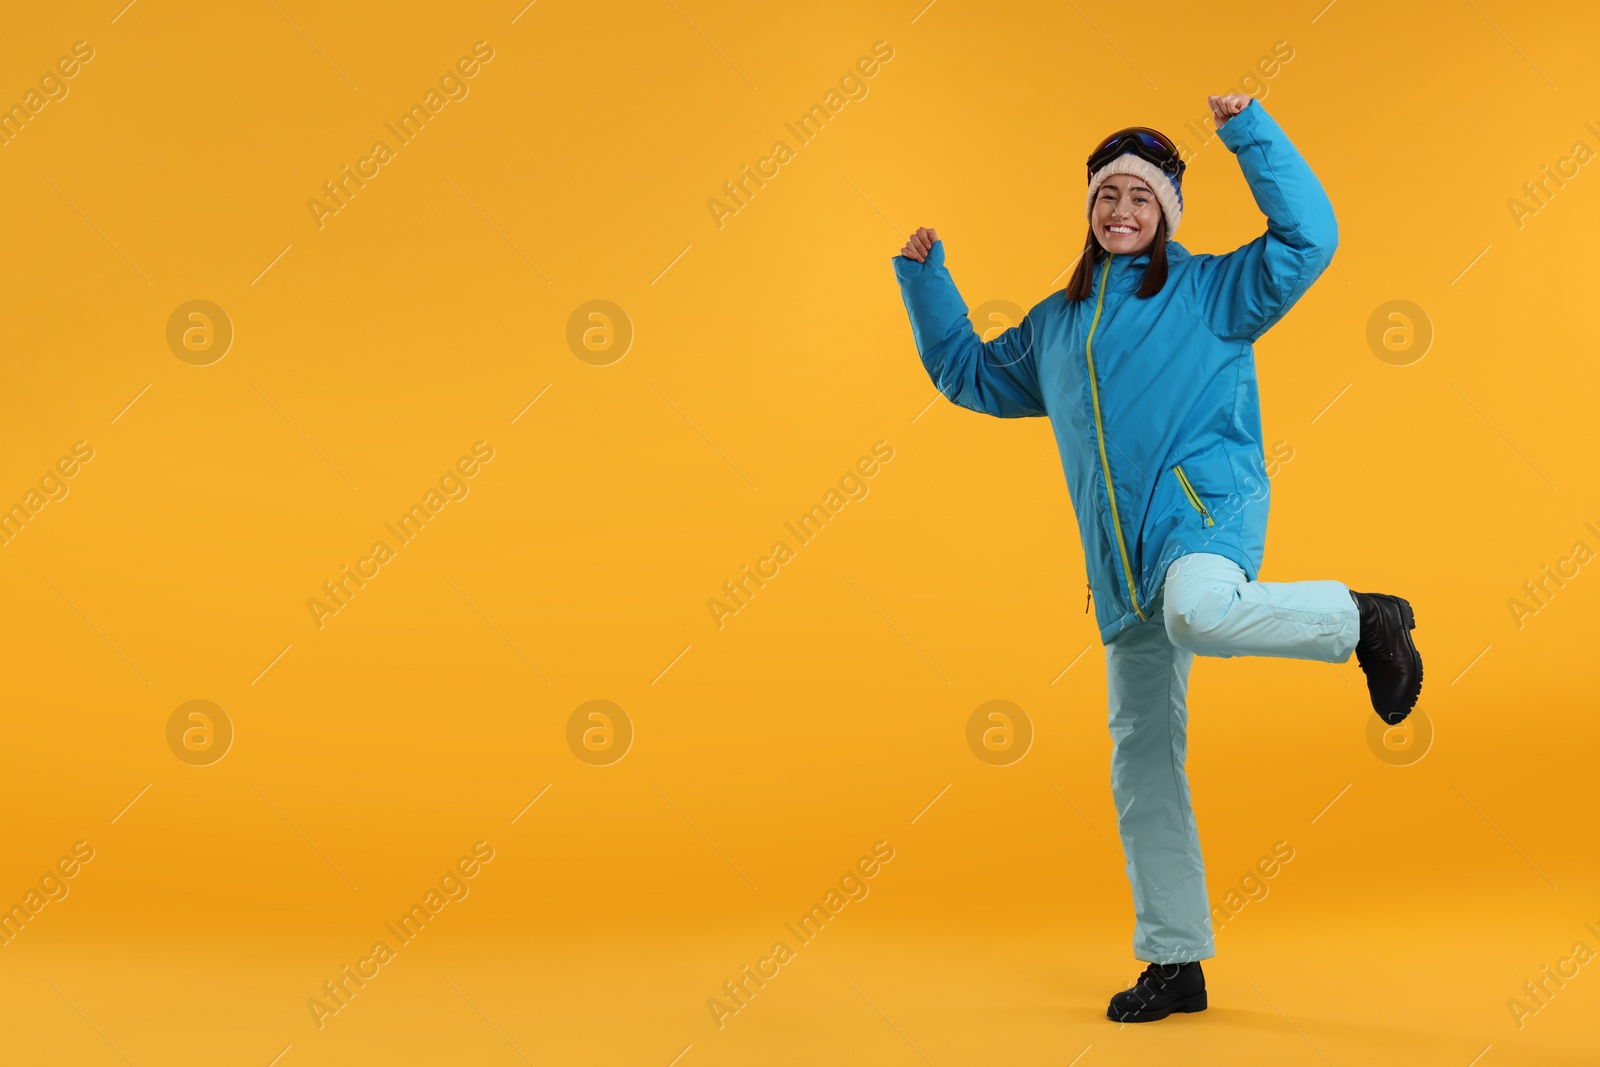 Photo of Winter sports. Happy woman with snowboard goggles on orange background, space for text